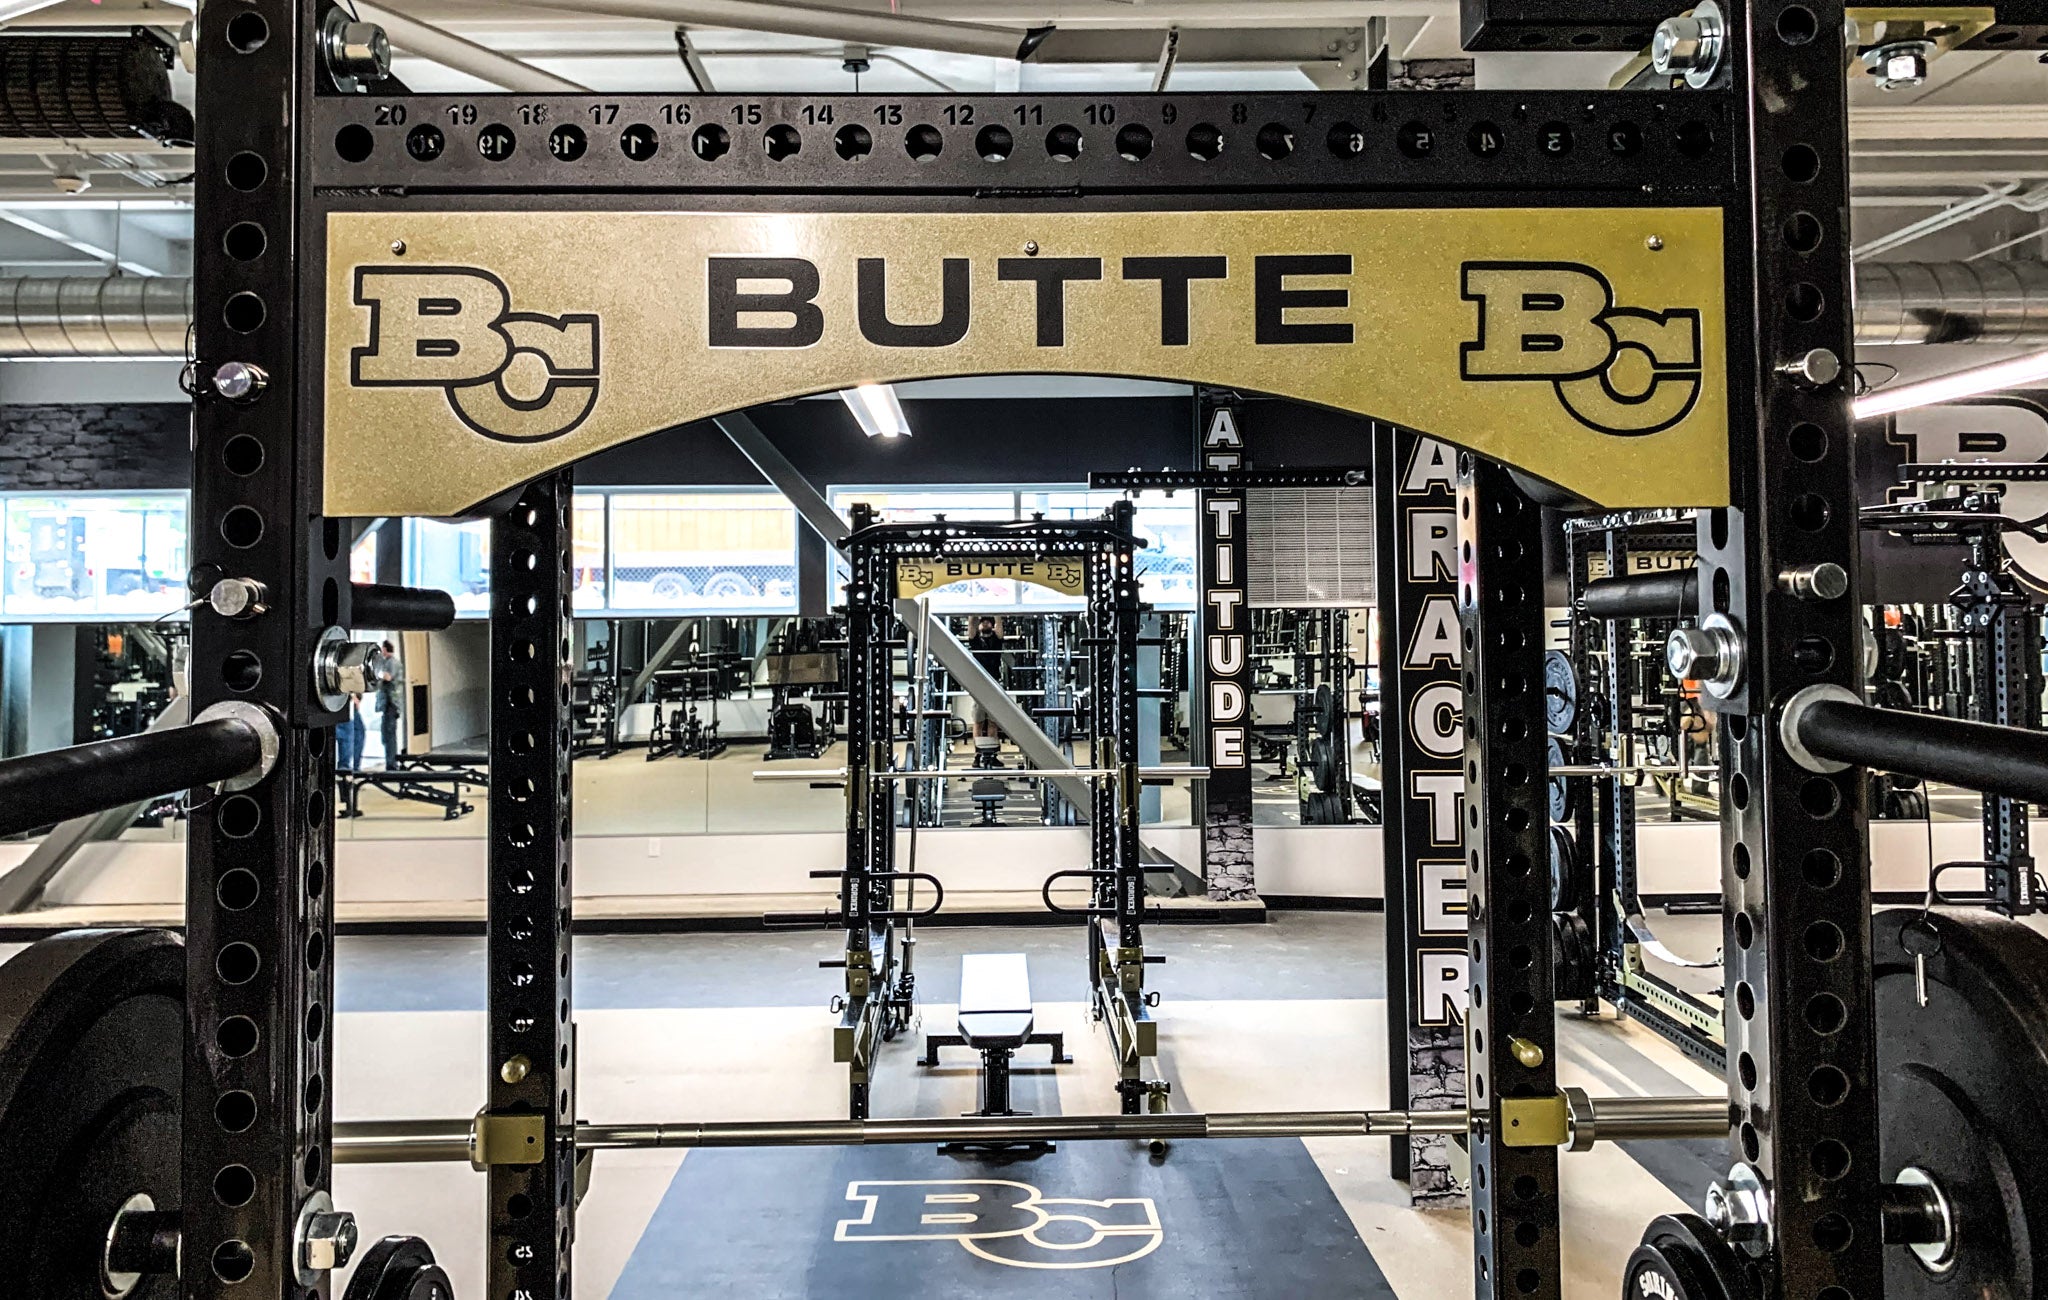 Butte Community College Football strength and conditioning